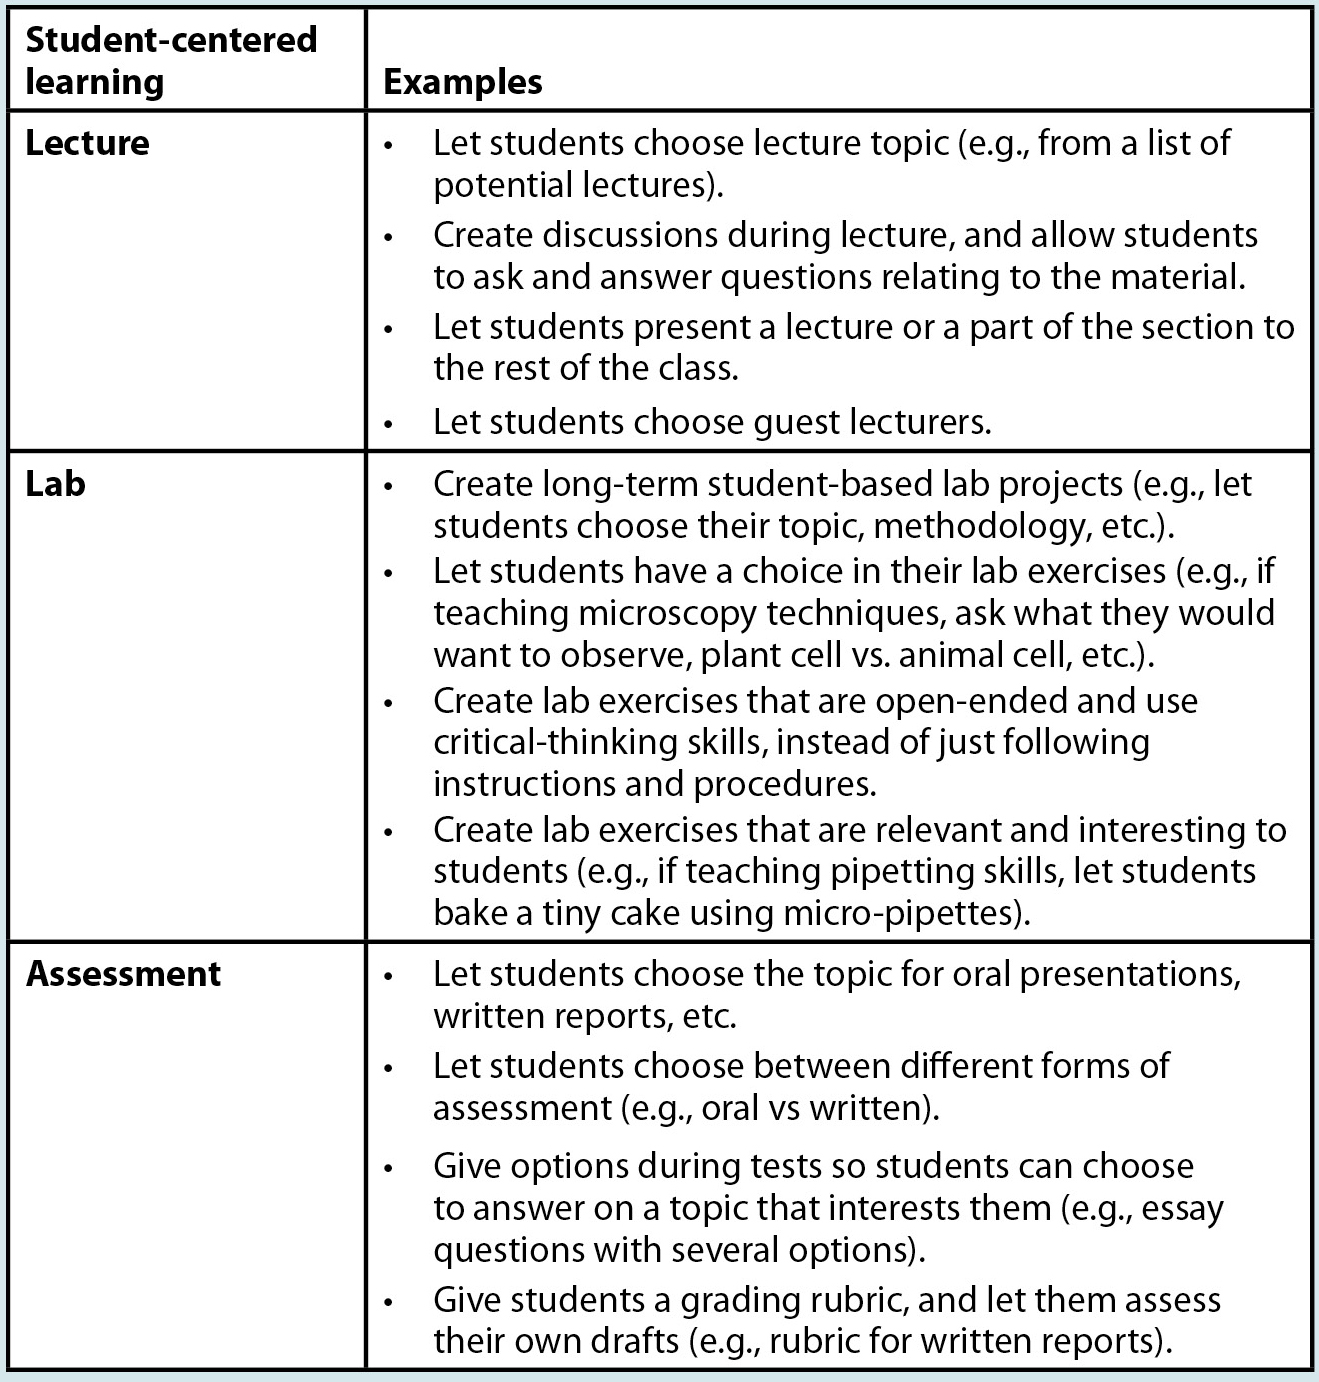 Some examples of student-centered learning that can be employed in lecture, lab, and assessments. 